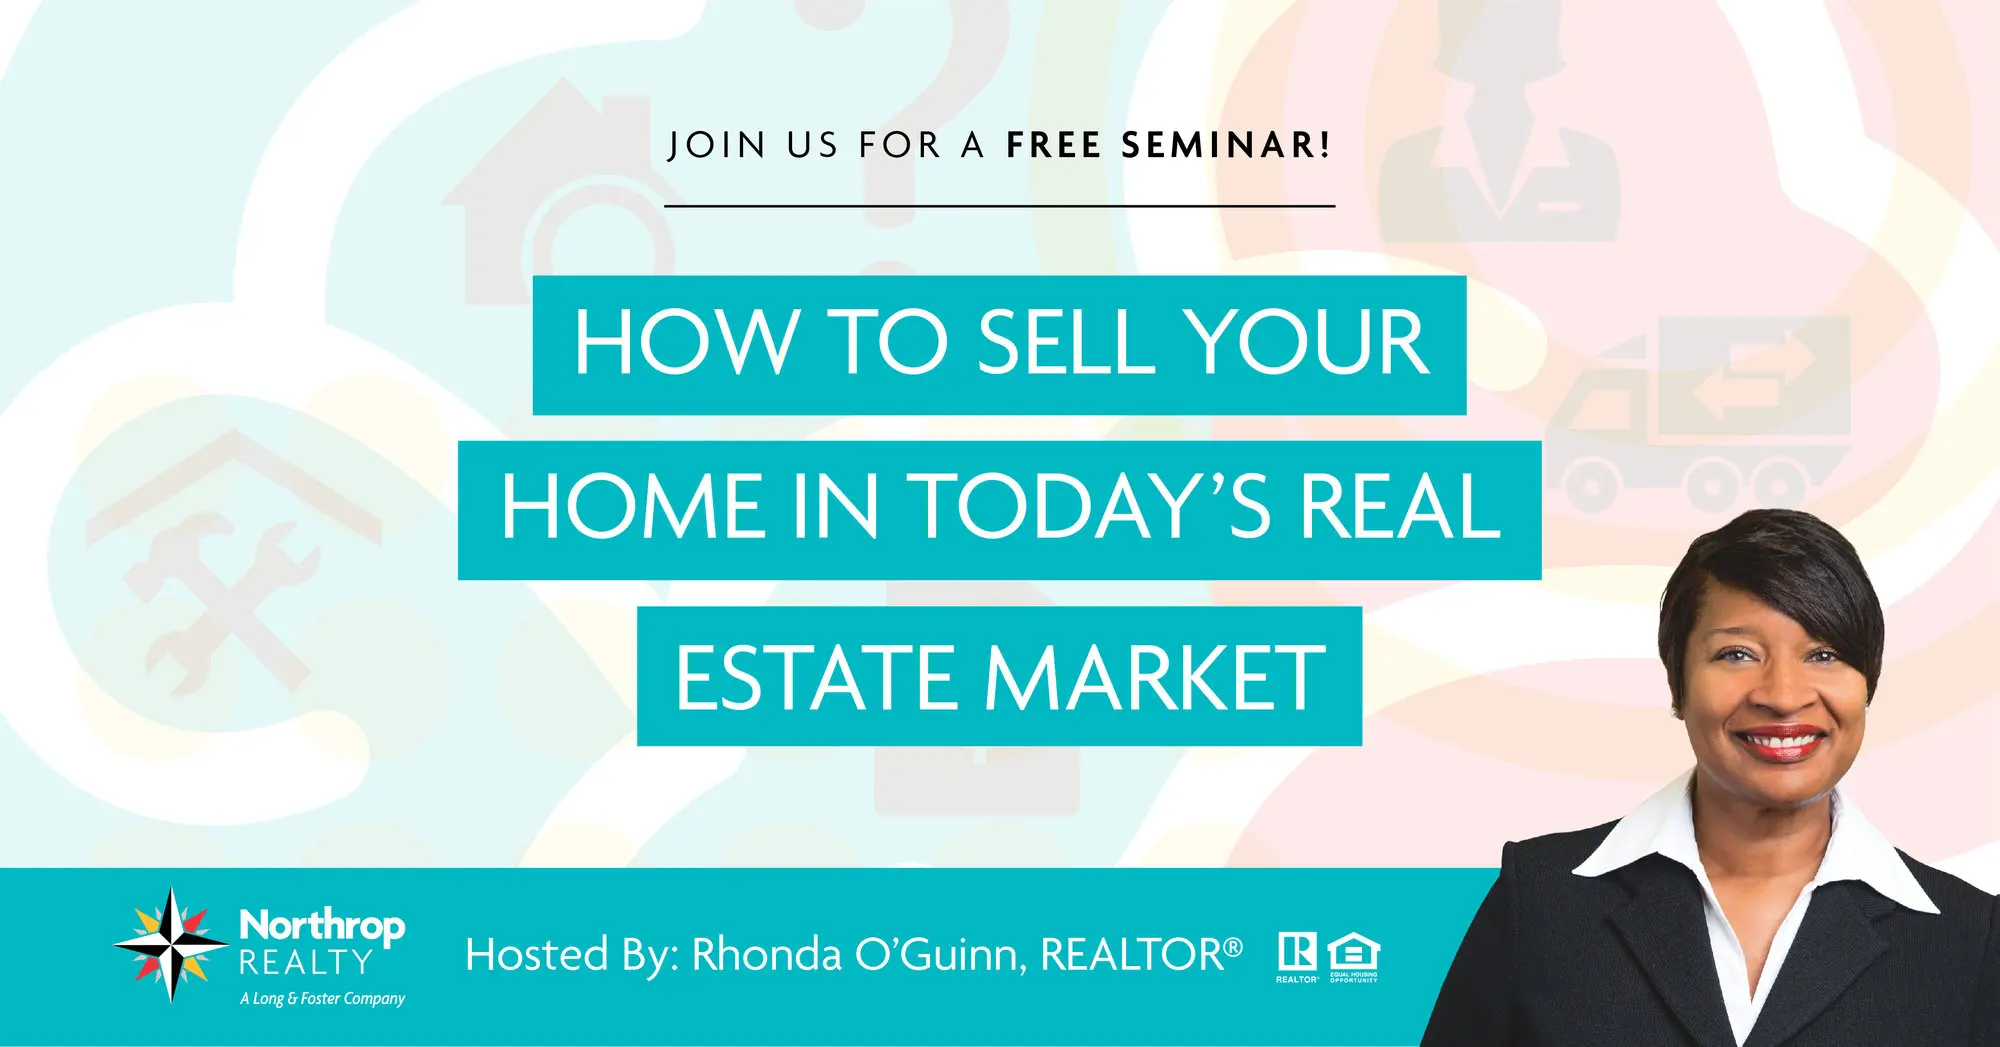 How to Sell Your Home in Today's Real Estate Market